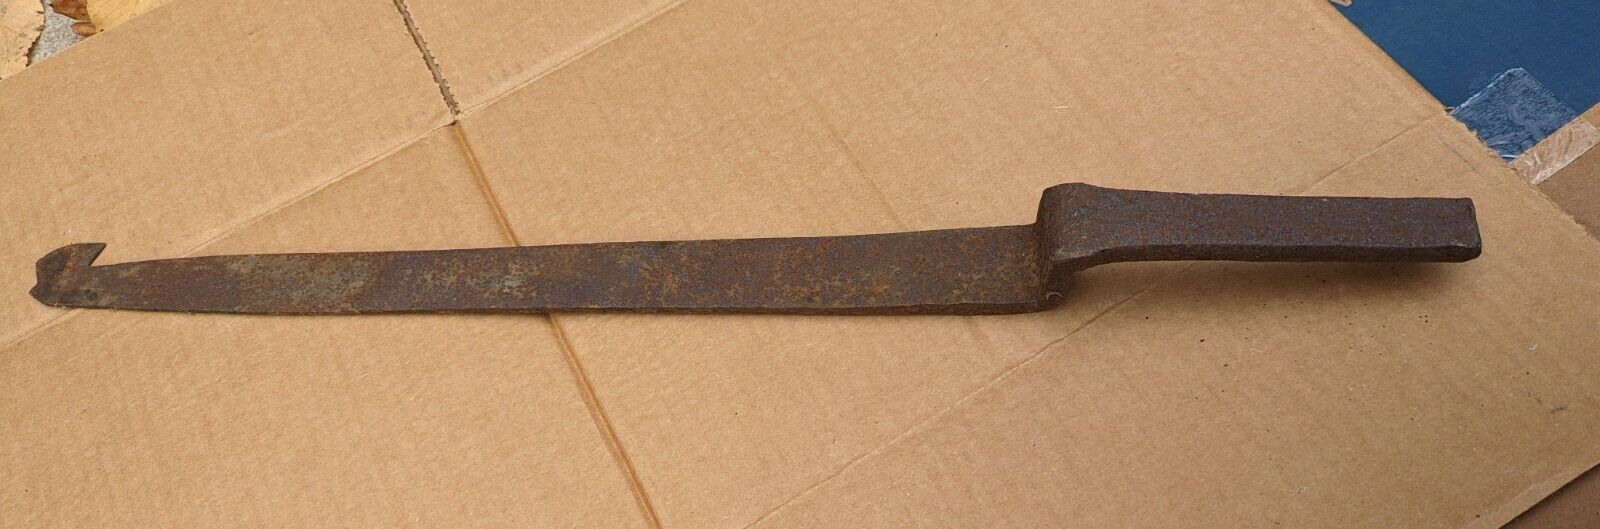 Antique Hand Forged Blacksmith Slaters Slate Ripper Tool